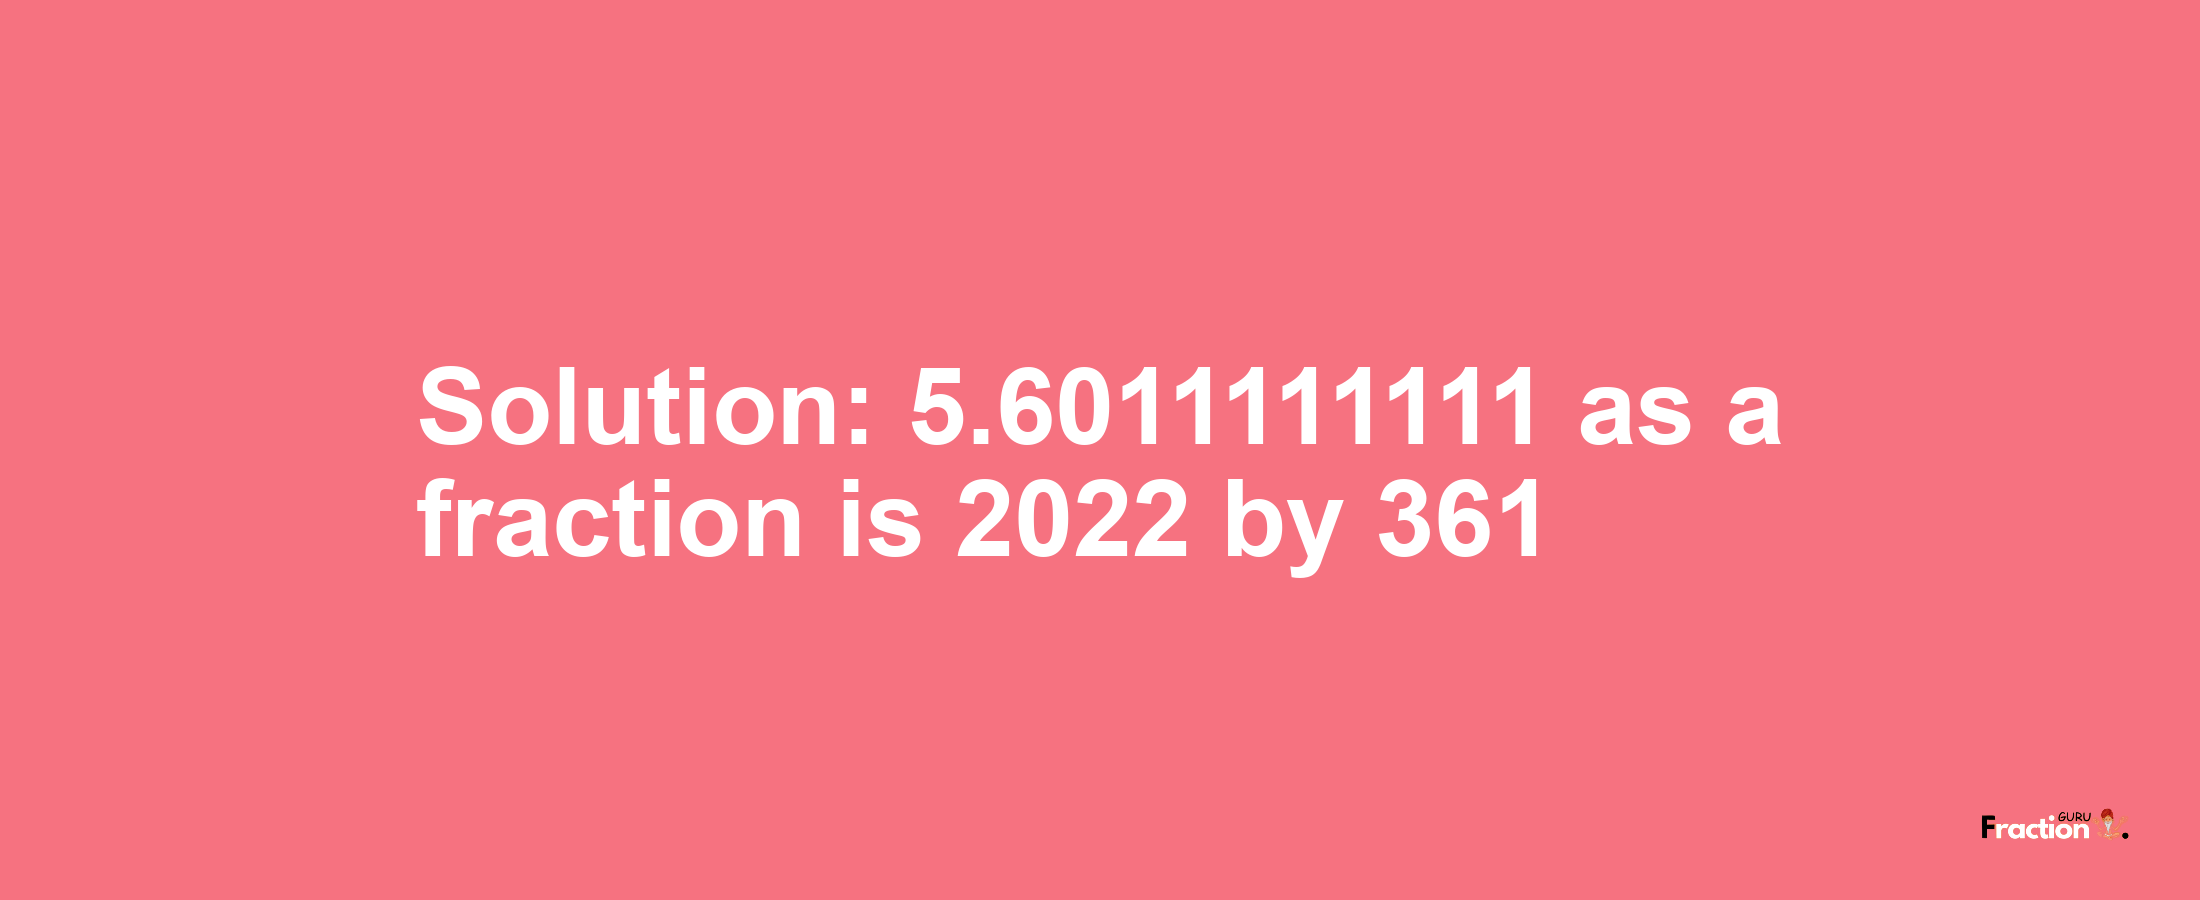 Solution:5.6011111111 as a fraction is 2022/361